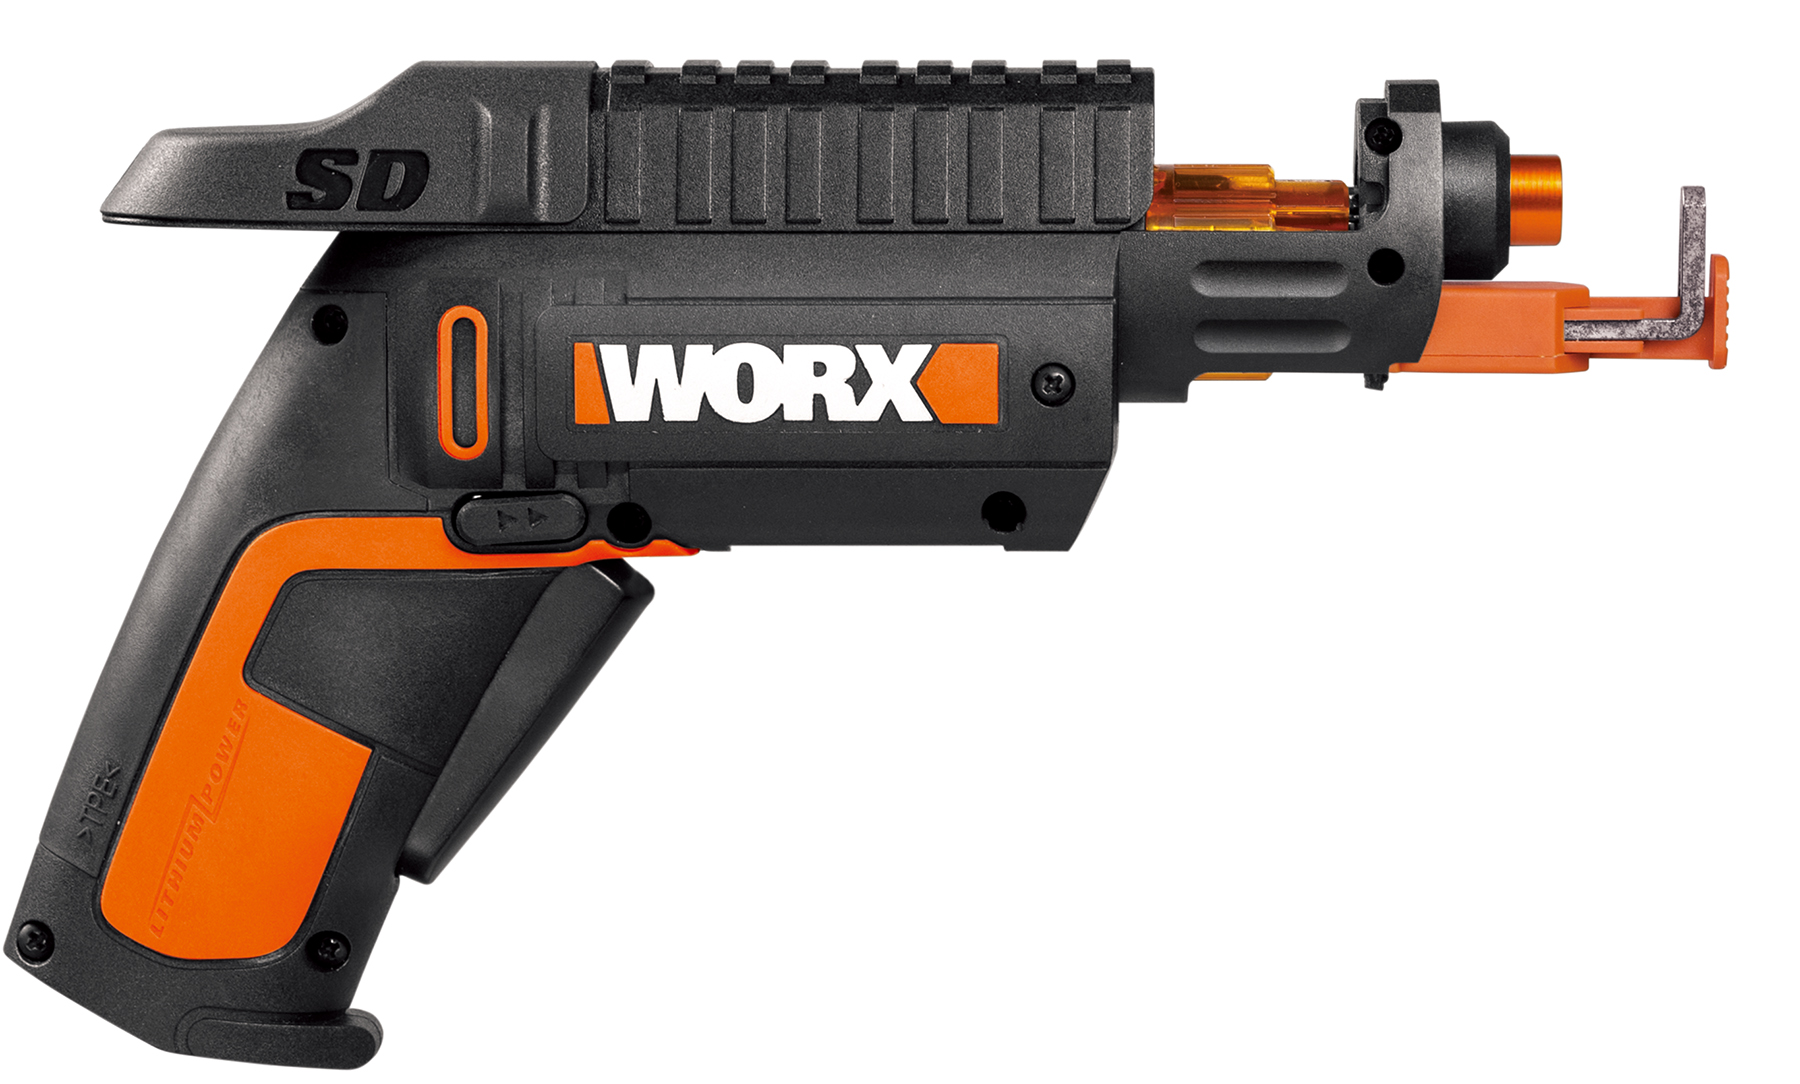 WORX SD SemiAutomatic Driver with Screw Holder (WX255L)